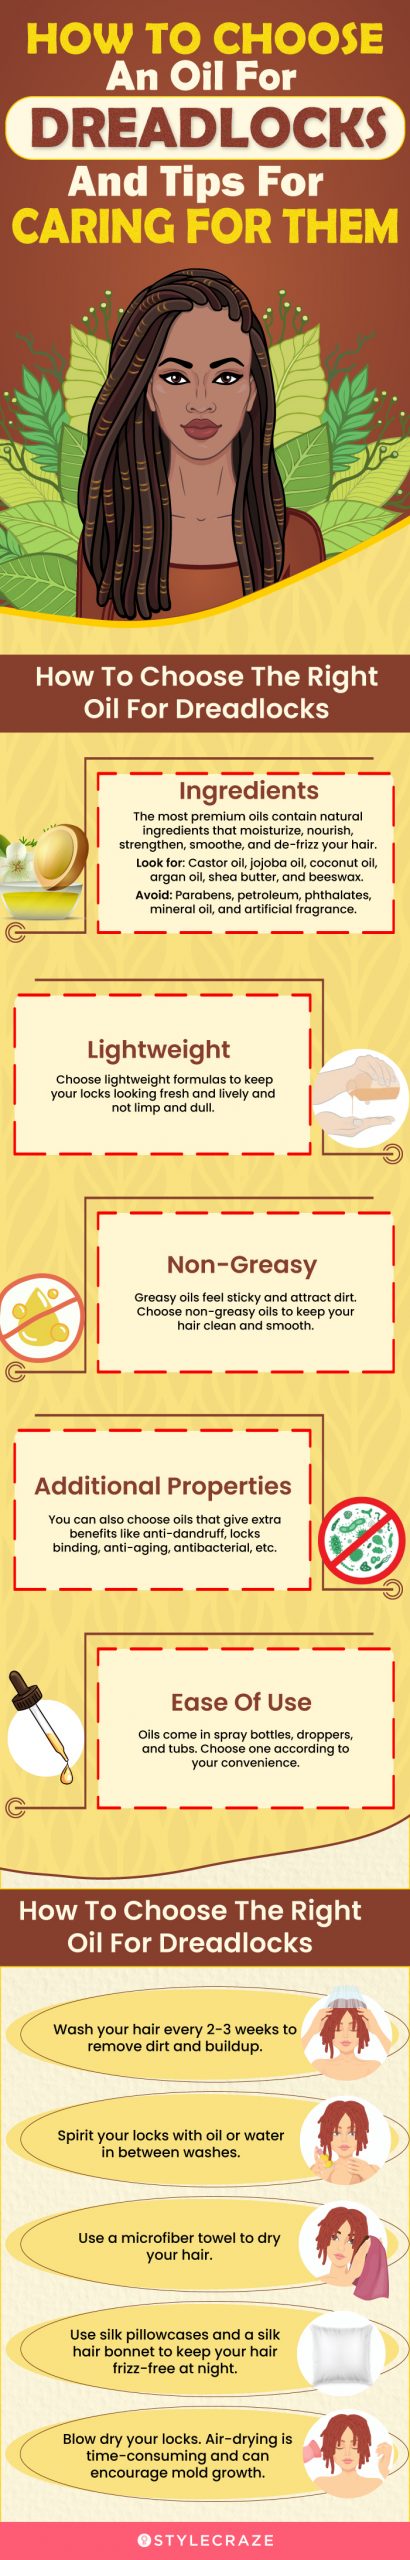 How To Choose An Oil For Dreadlocks [infographic]